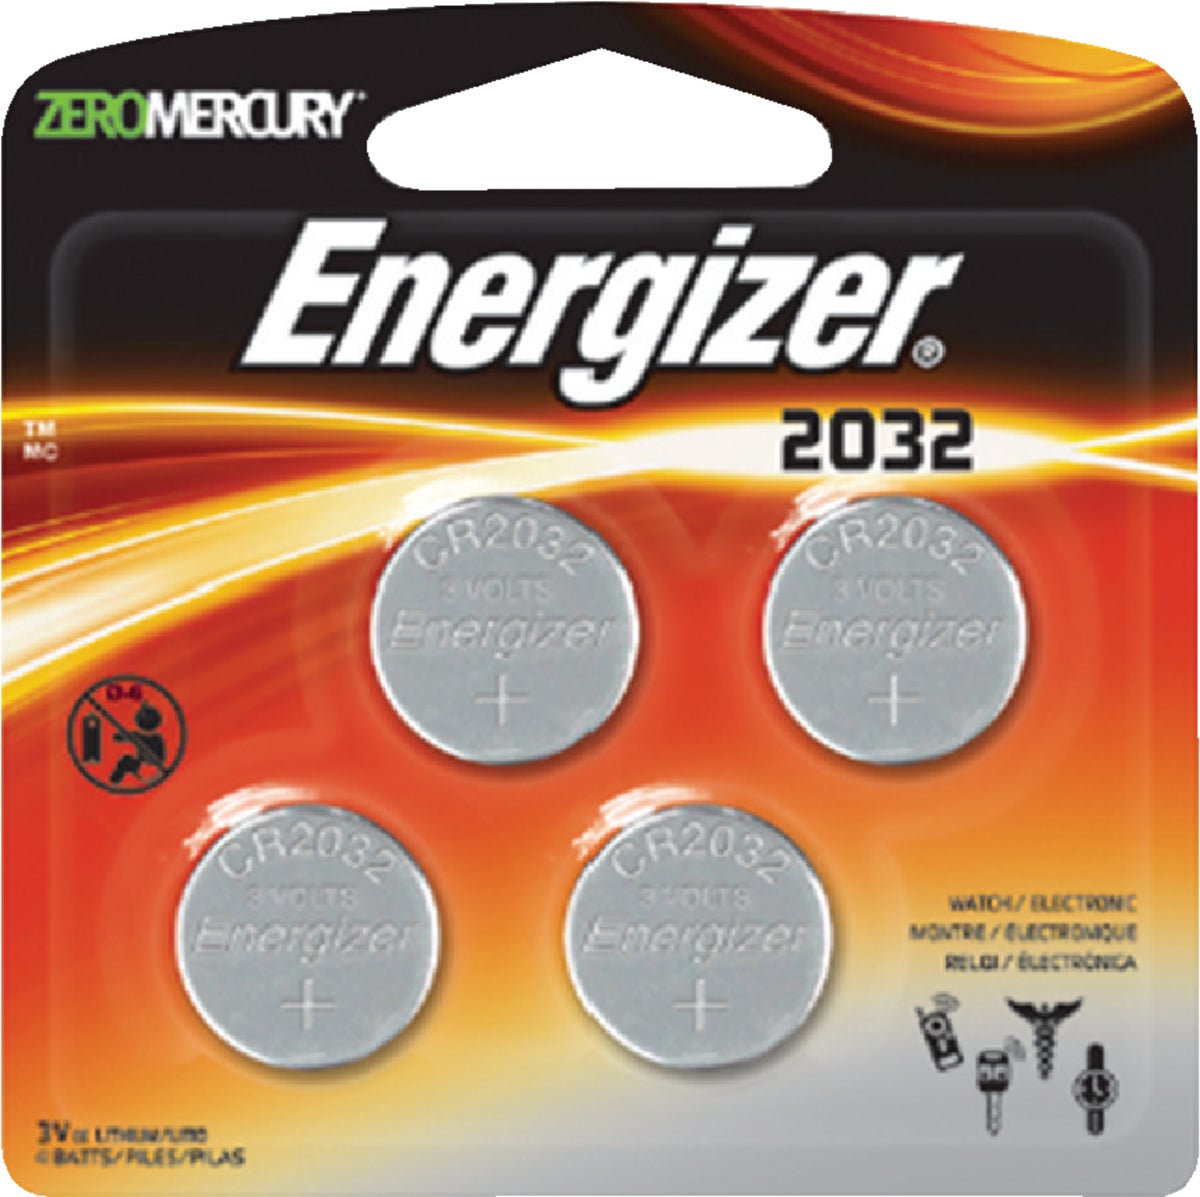 Buy Energizer Coin Cell Battery 240 MAh